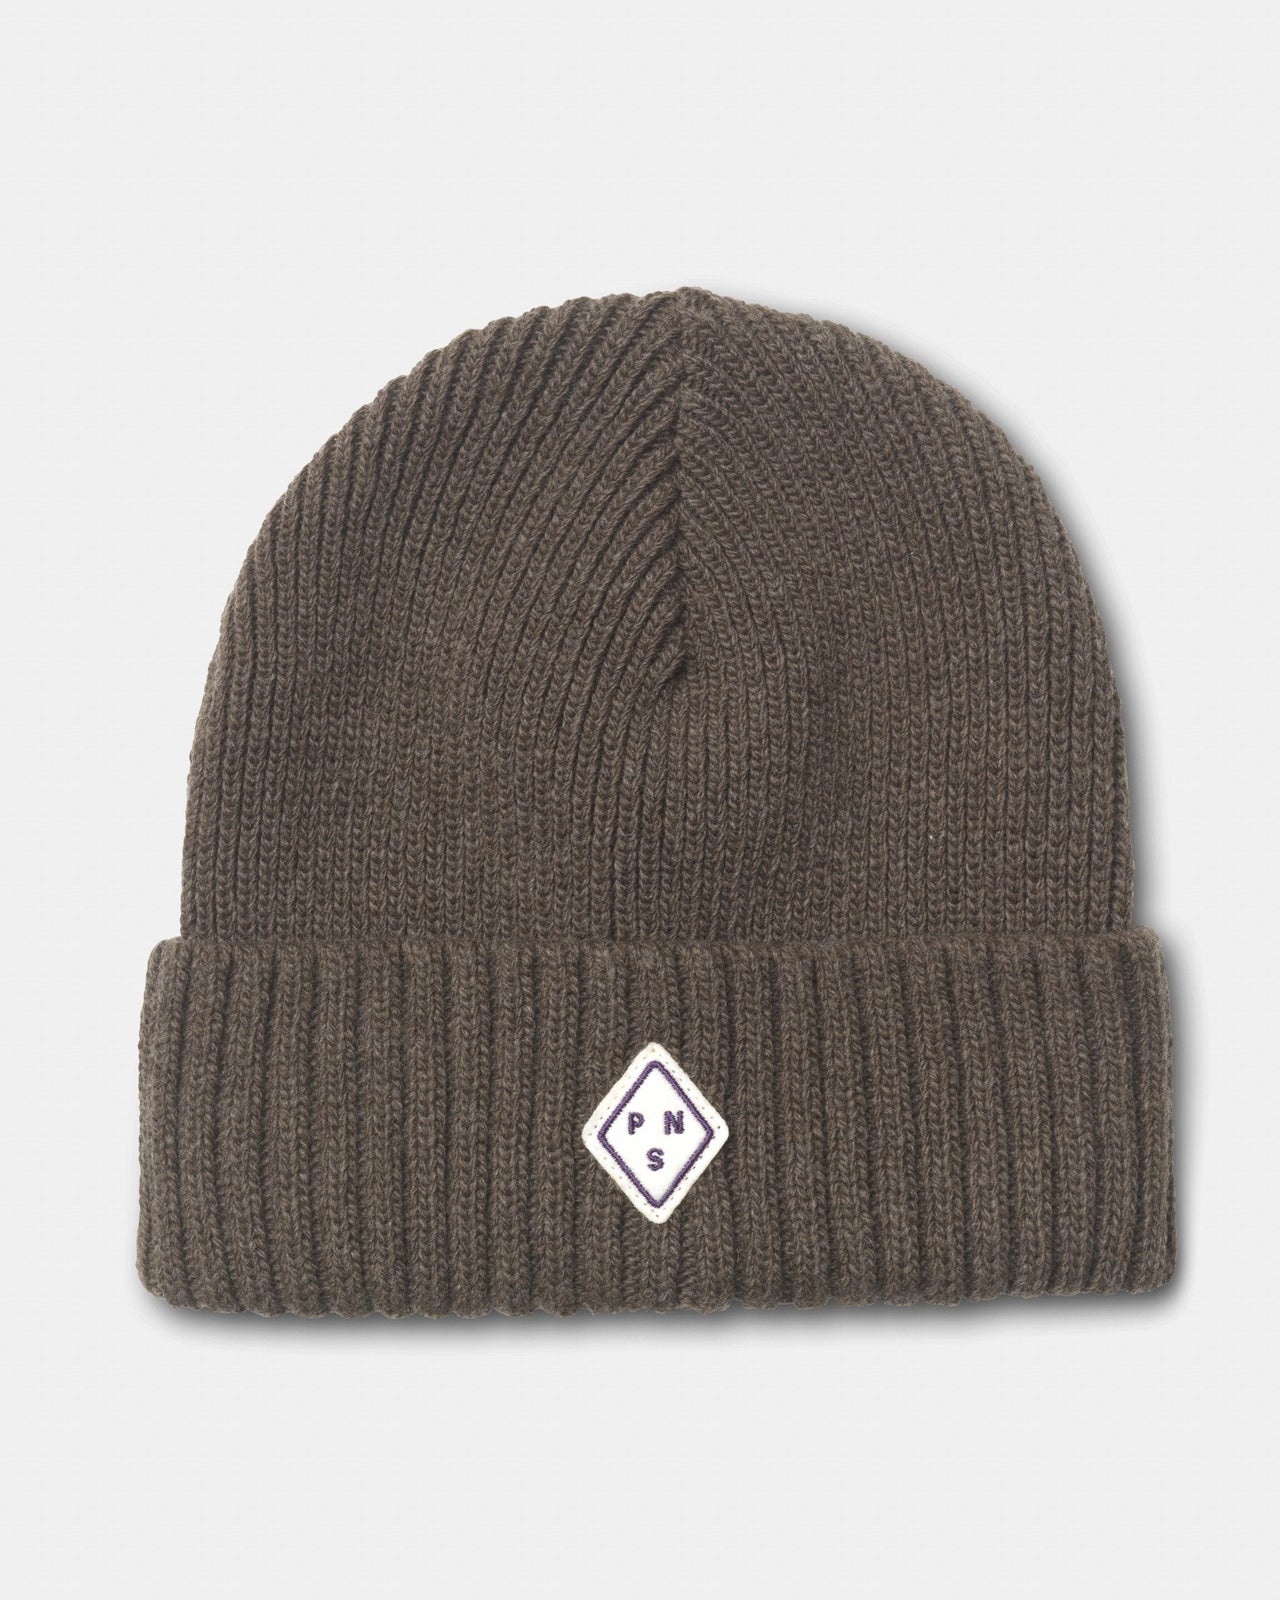 Off-Race Patch Beanie - Ash Brown